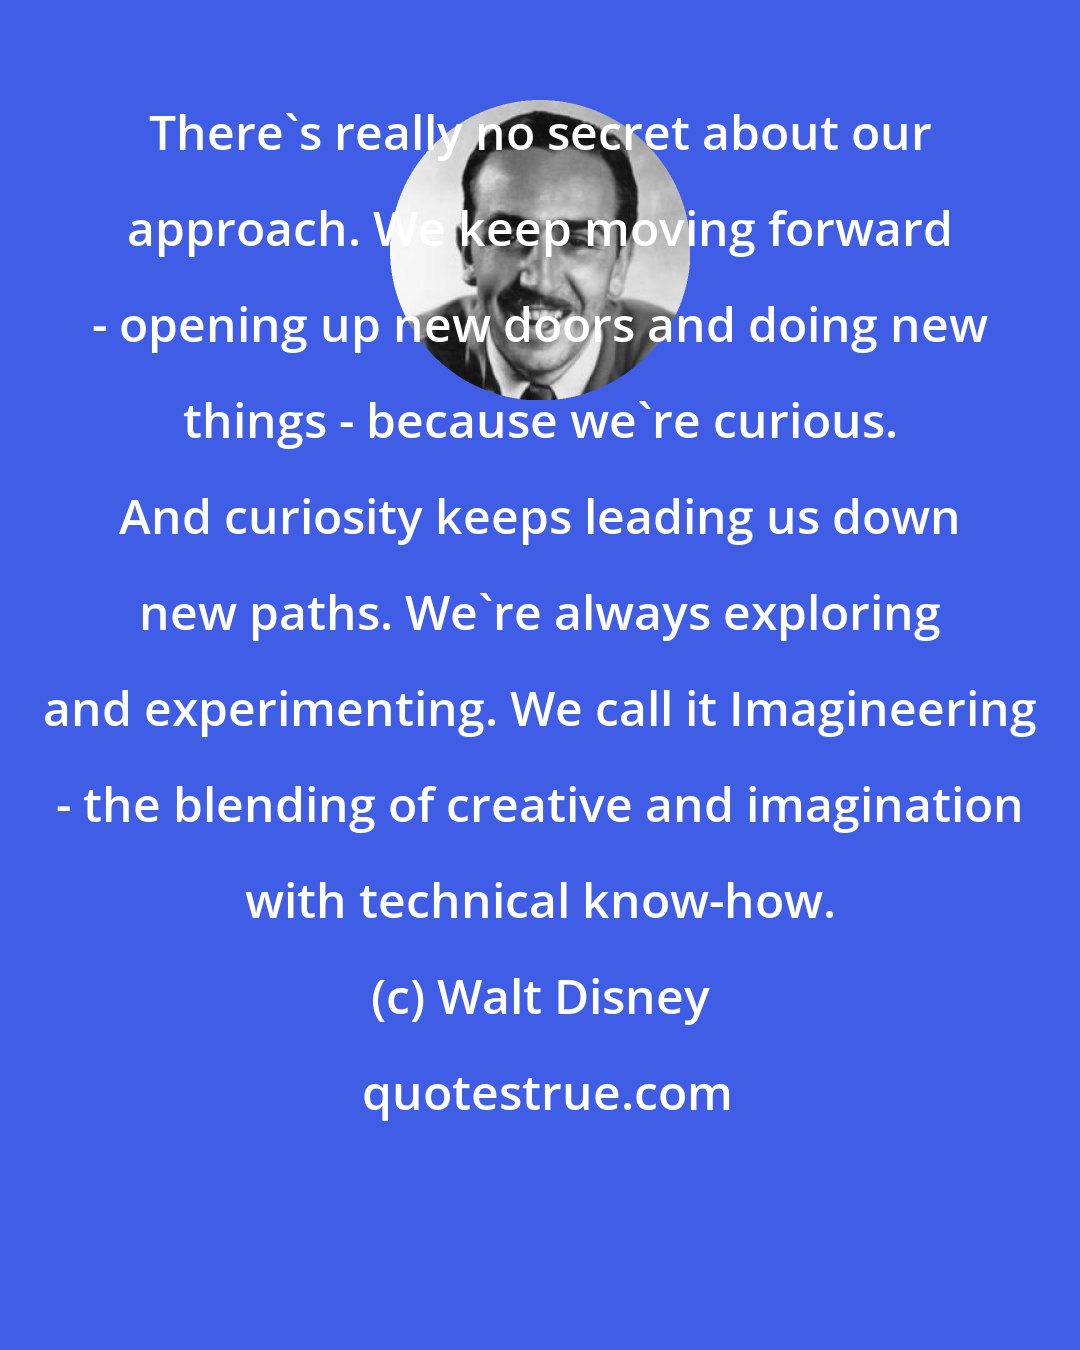 Walt Disney: There's really no secret about our approach. We keep moving forward - opening up new doors and doing new things - because we're curious. And curiosity keeps leading us down new paths. We're always exploring and experimenting. We call it Imagineering - the blending of creative and imagination with technical know-how.